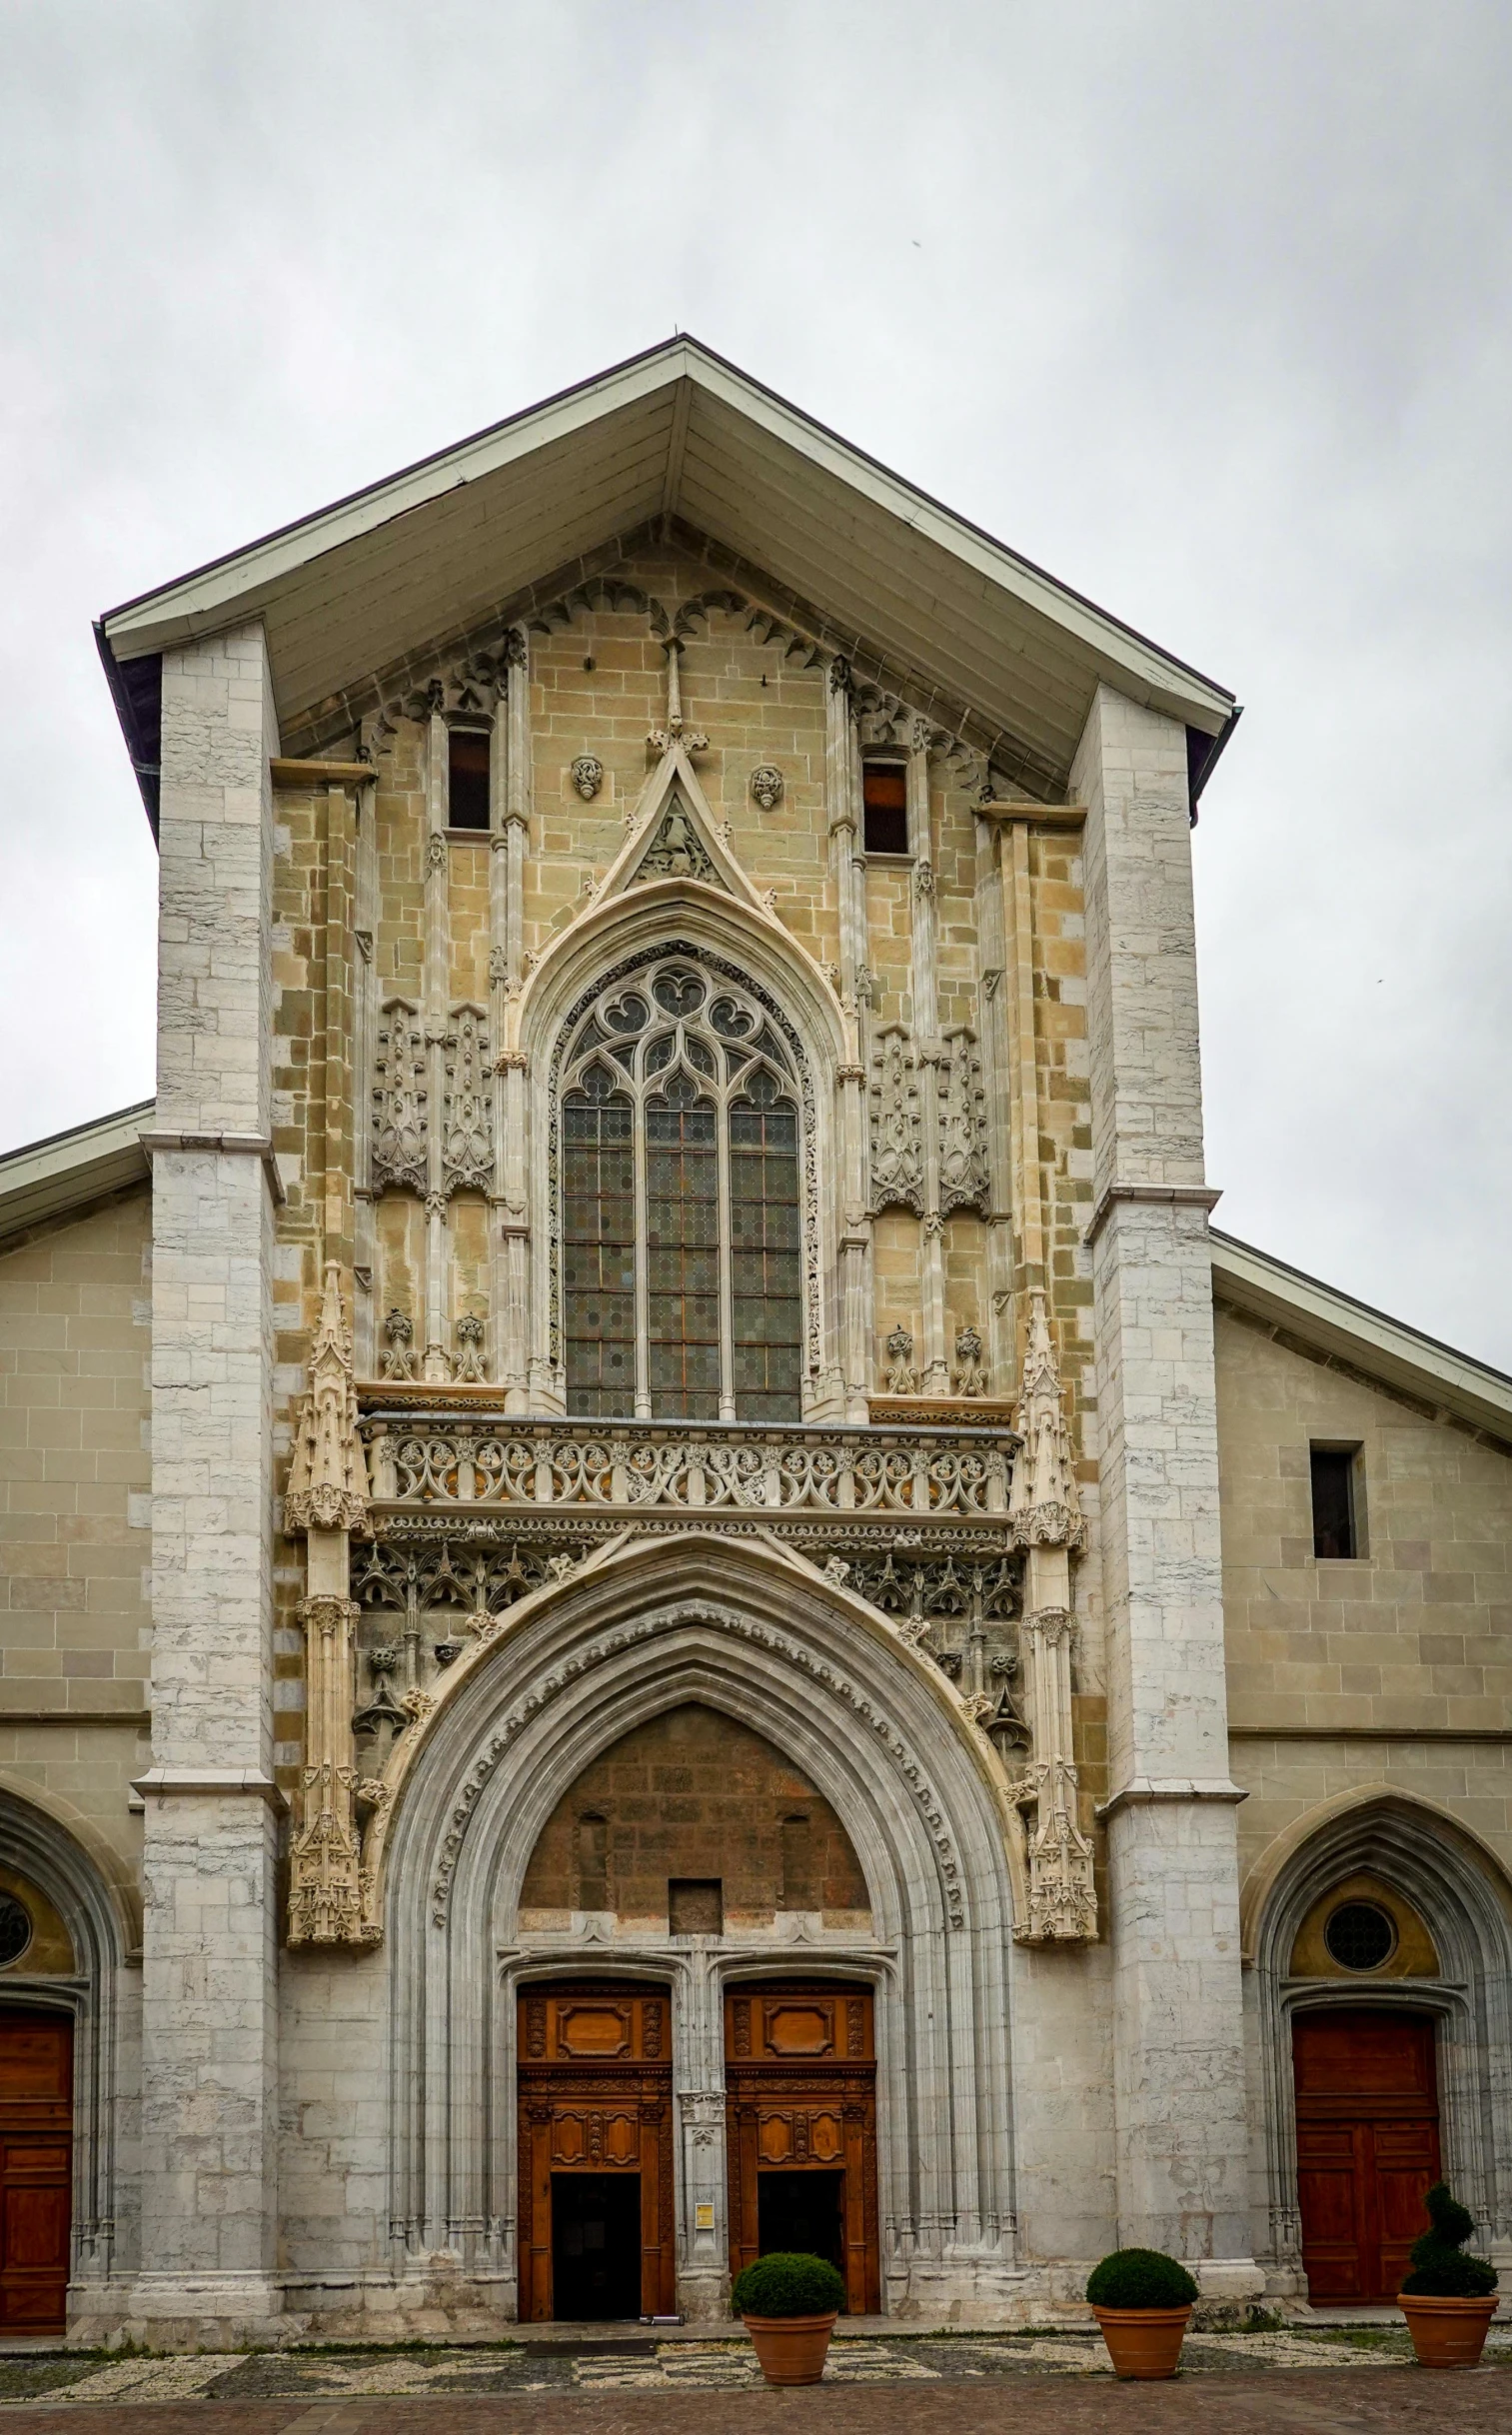 an old church building with ornate arched doors